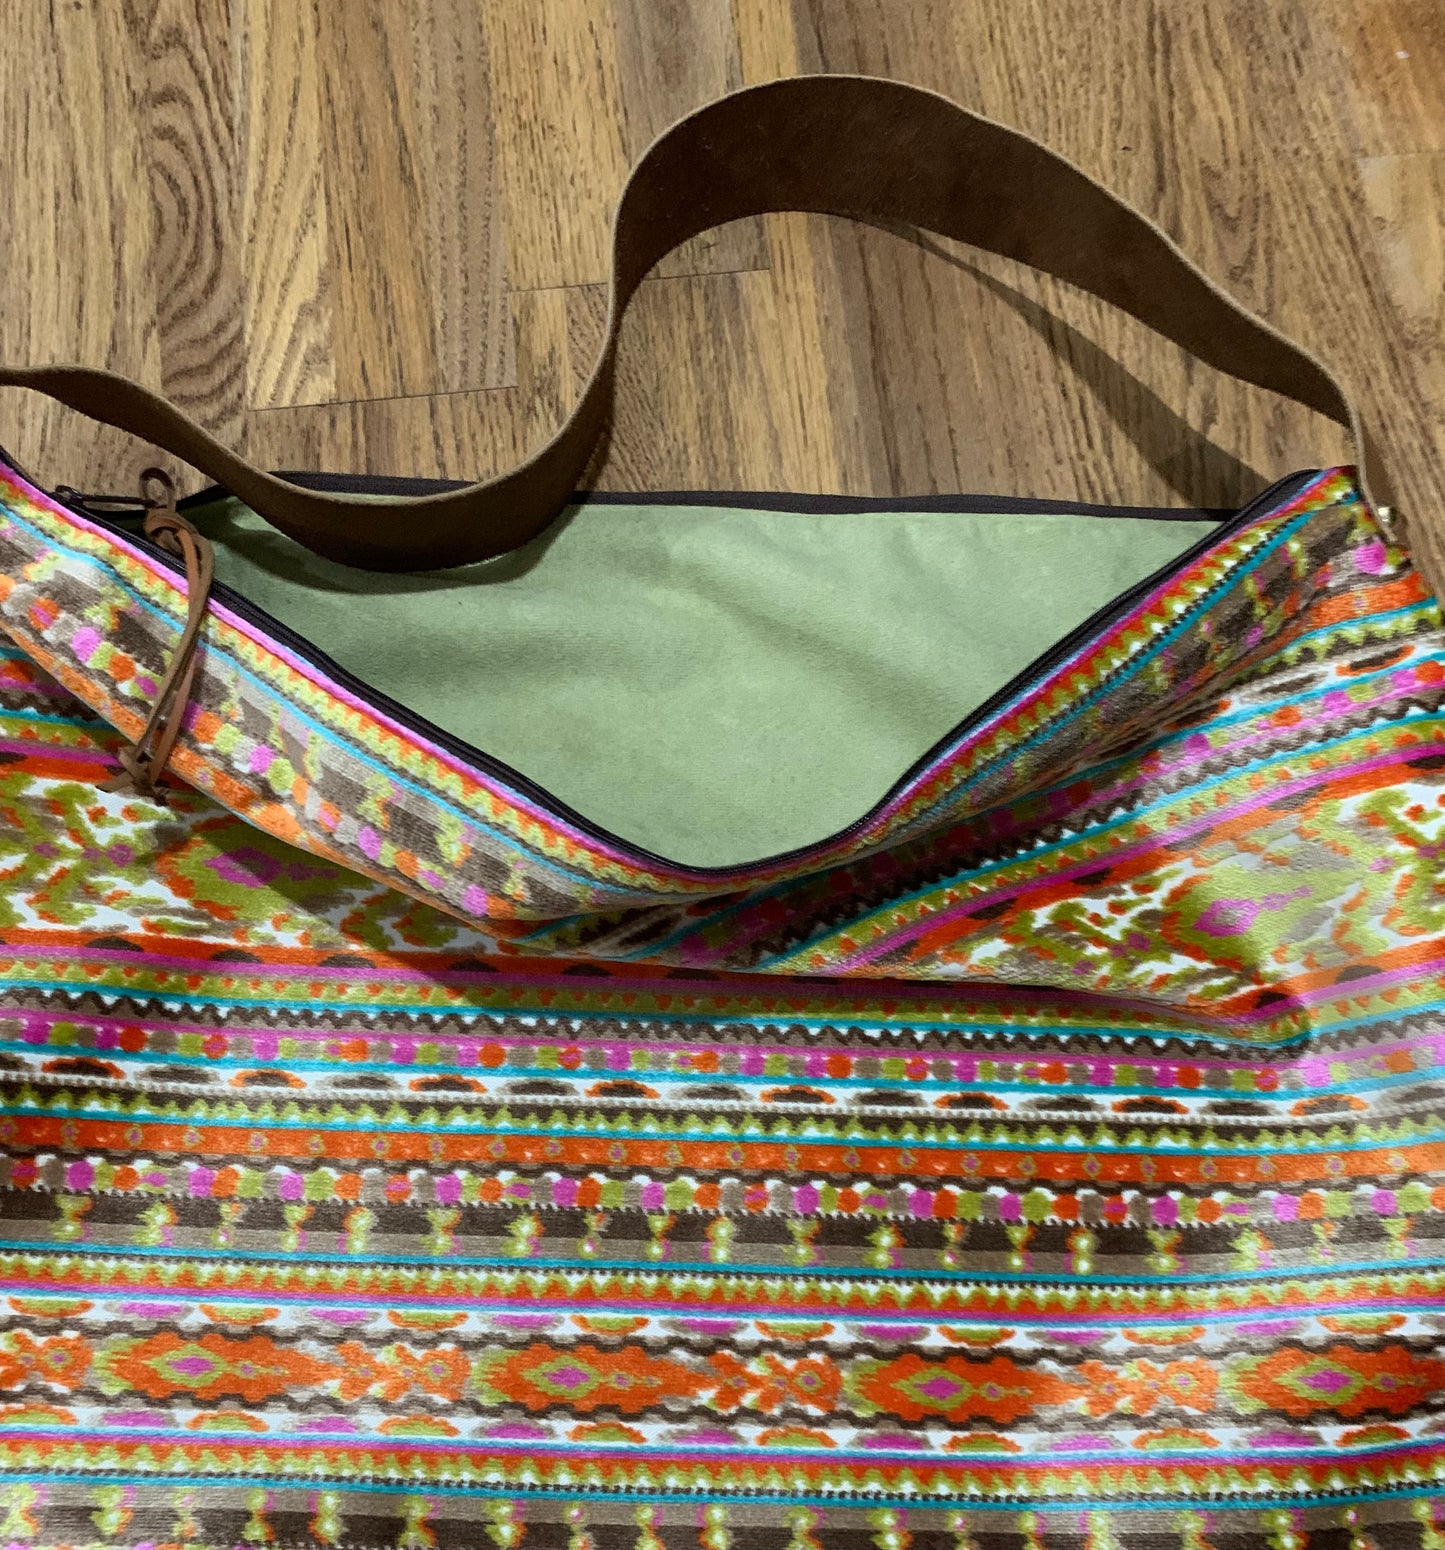 The Day Bag- Aztec Twist - DMD Bags